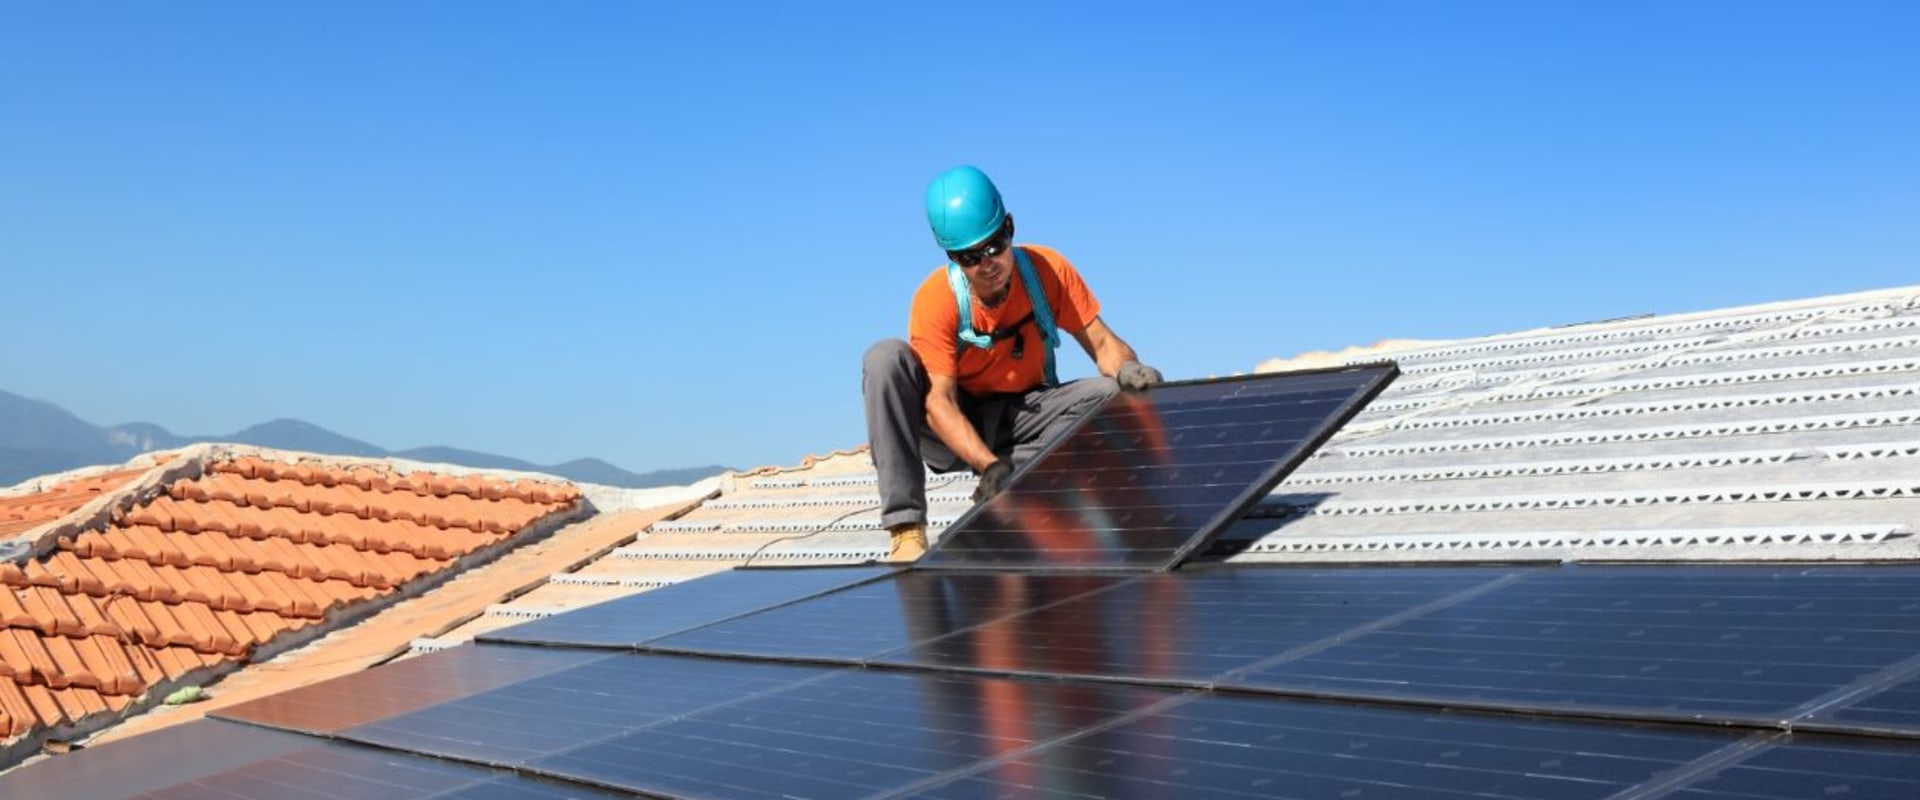 Choosing the Perfect Location for Your Solar Panel System